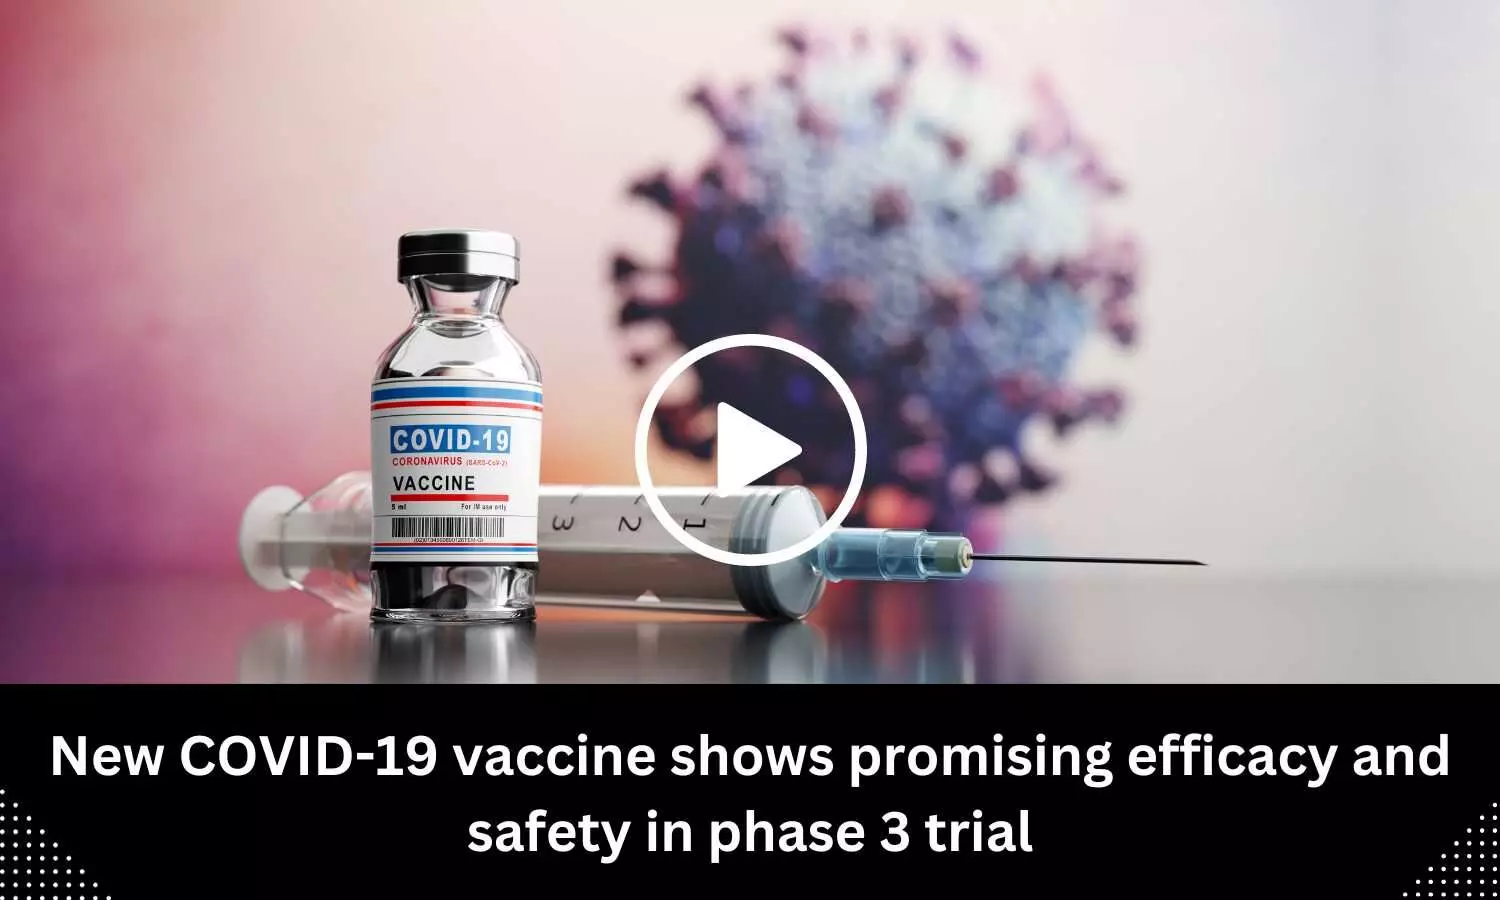 New COVID-19 vaccine shows promising efficacy and safety in phase 3 trial